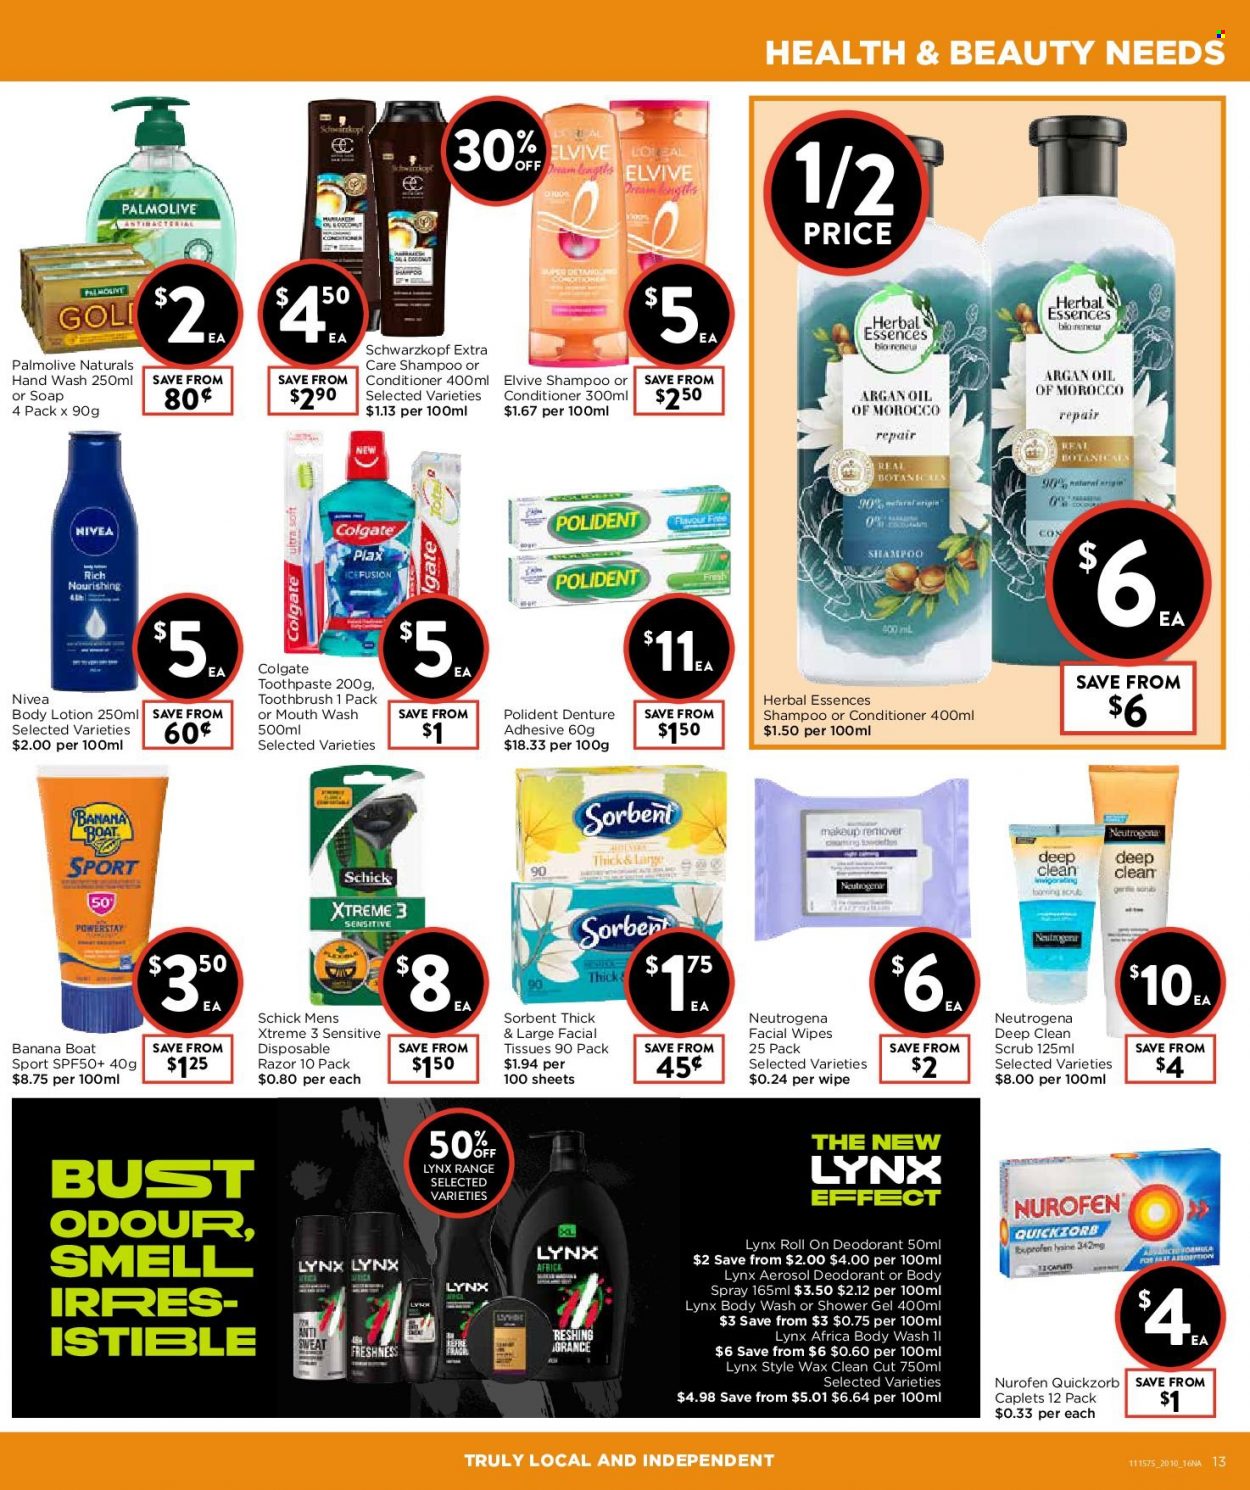 thumbnail - Foodworks Catalogue - 20 Oct 2021 - 26 Oct 2021 - Sales products - TRULY, wipes, Nivea, tissues, body wash, shampoo, shower gel, Schwarzkopf, hand wash, Palmolive, soap, Colgate, toothbrush, toothpaste, Plax, Polident, facial tissues, Neutrogena, conditioner, Herbal Essences, body lotion, body spray, anti-perspirant, roll-on, deodorant, Schick, disposable razor, argan oil, Nurofen. Page 13.